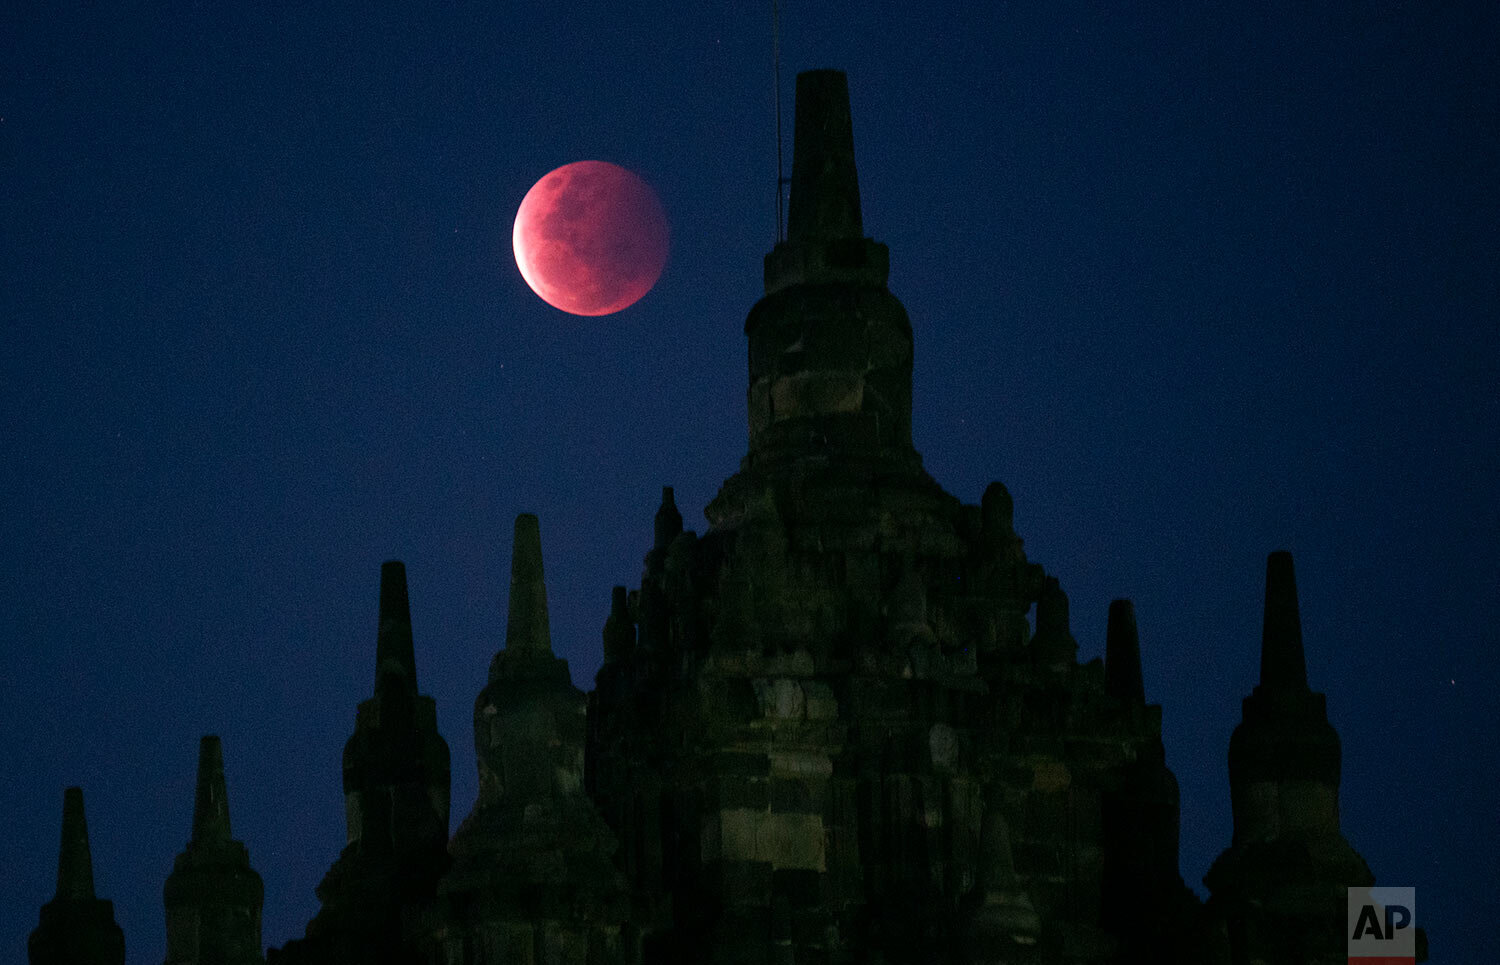  A full moon rises over the 9th century Plaosan Temple as a lunar eclipse takes place in Yogyakarta, Indonesia, Wednesday, May 26, 2021.  (AP Photo/Kasan Kurdi) 